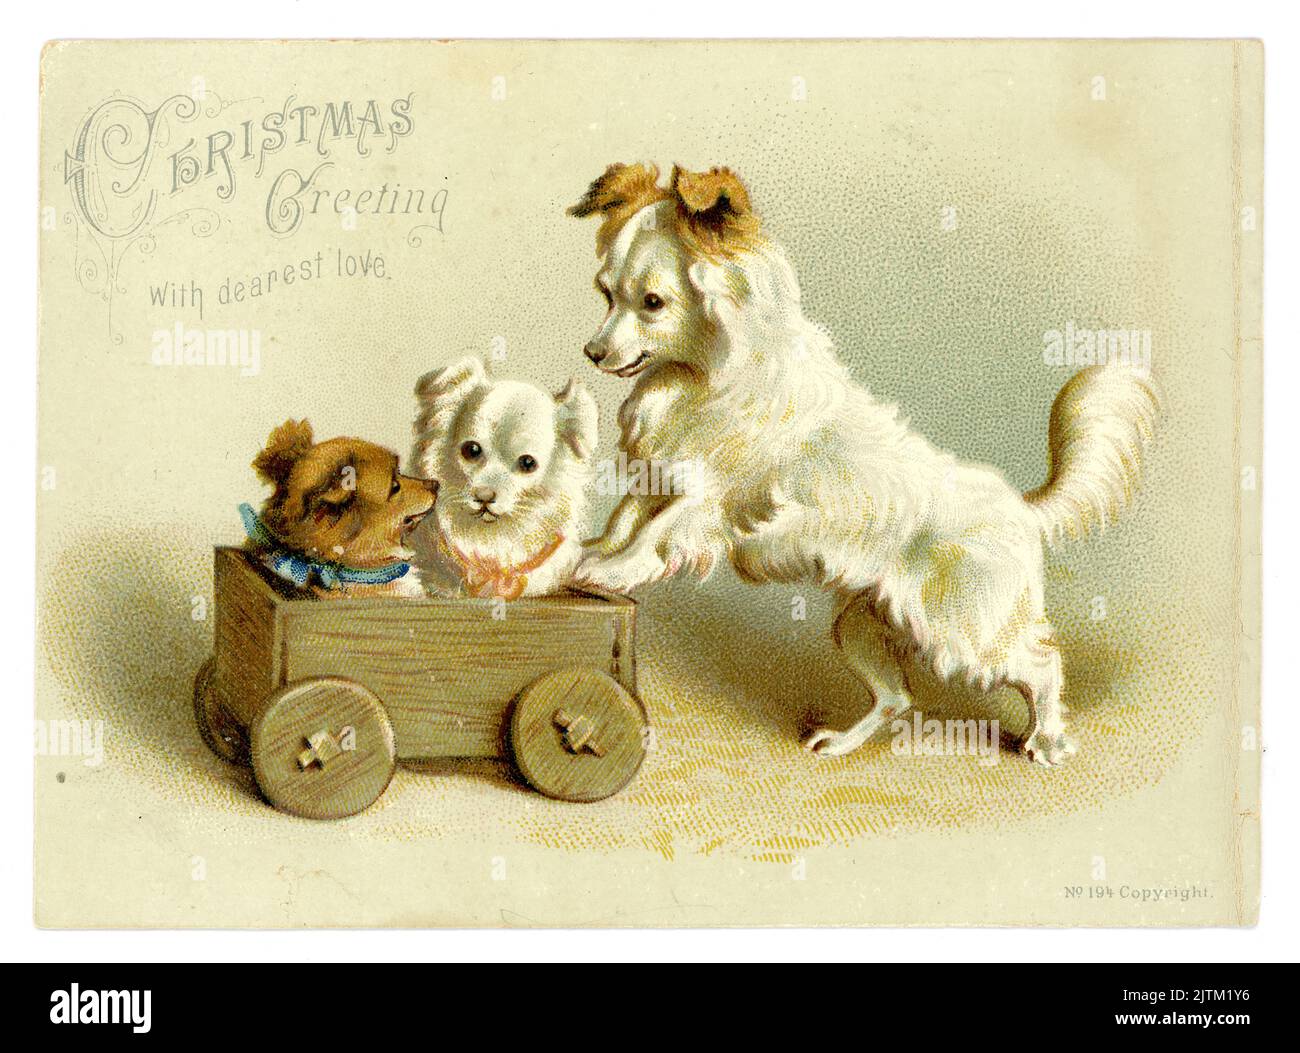 Original, charming Victorian Christmas card, greetings card of cute terrier dog pushing two puppies in a toy wooden truck or cart, Christmas Greeting with dearest love, circa 1890's, U.K. Stock Photo